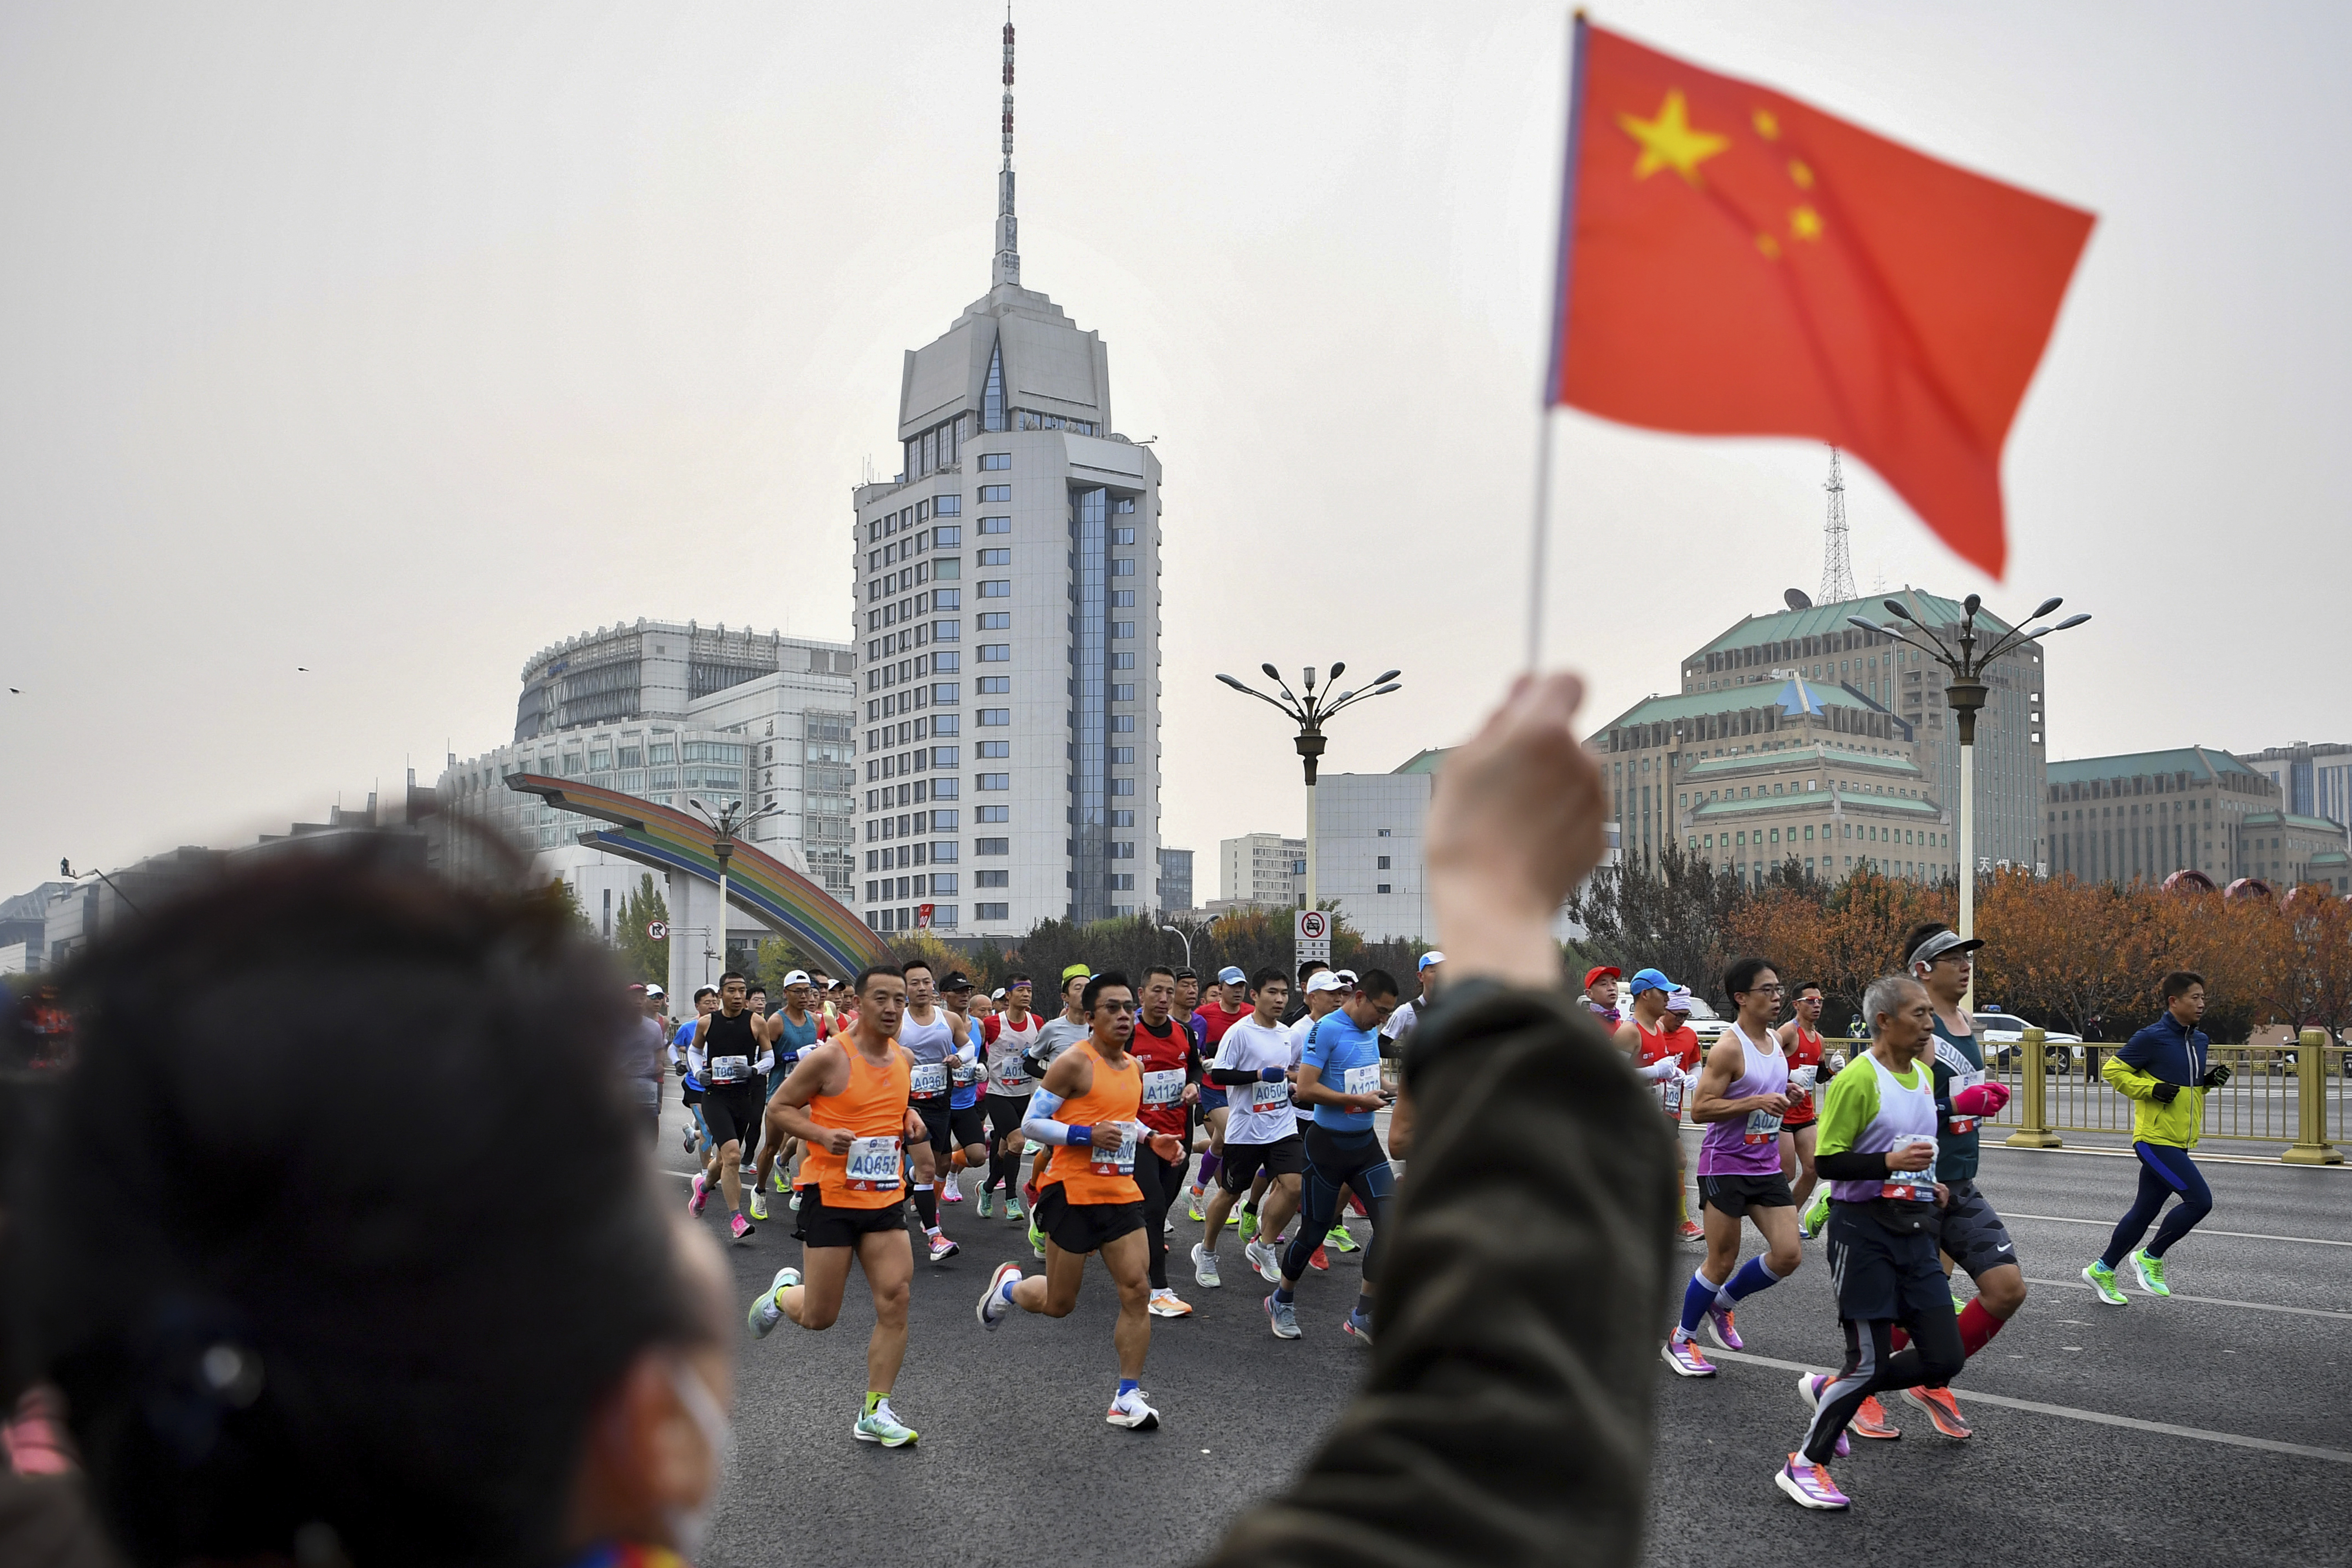 A spectator waves a national flag as runners compete in the Beijing Marathon